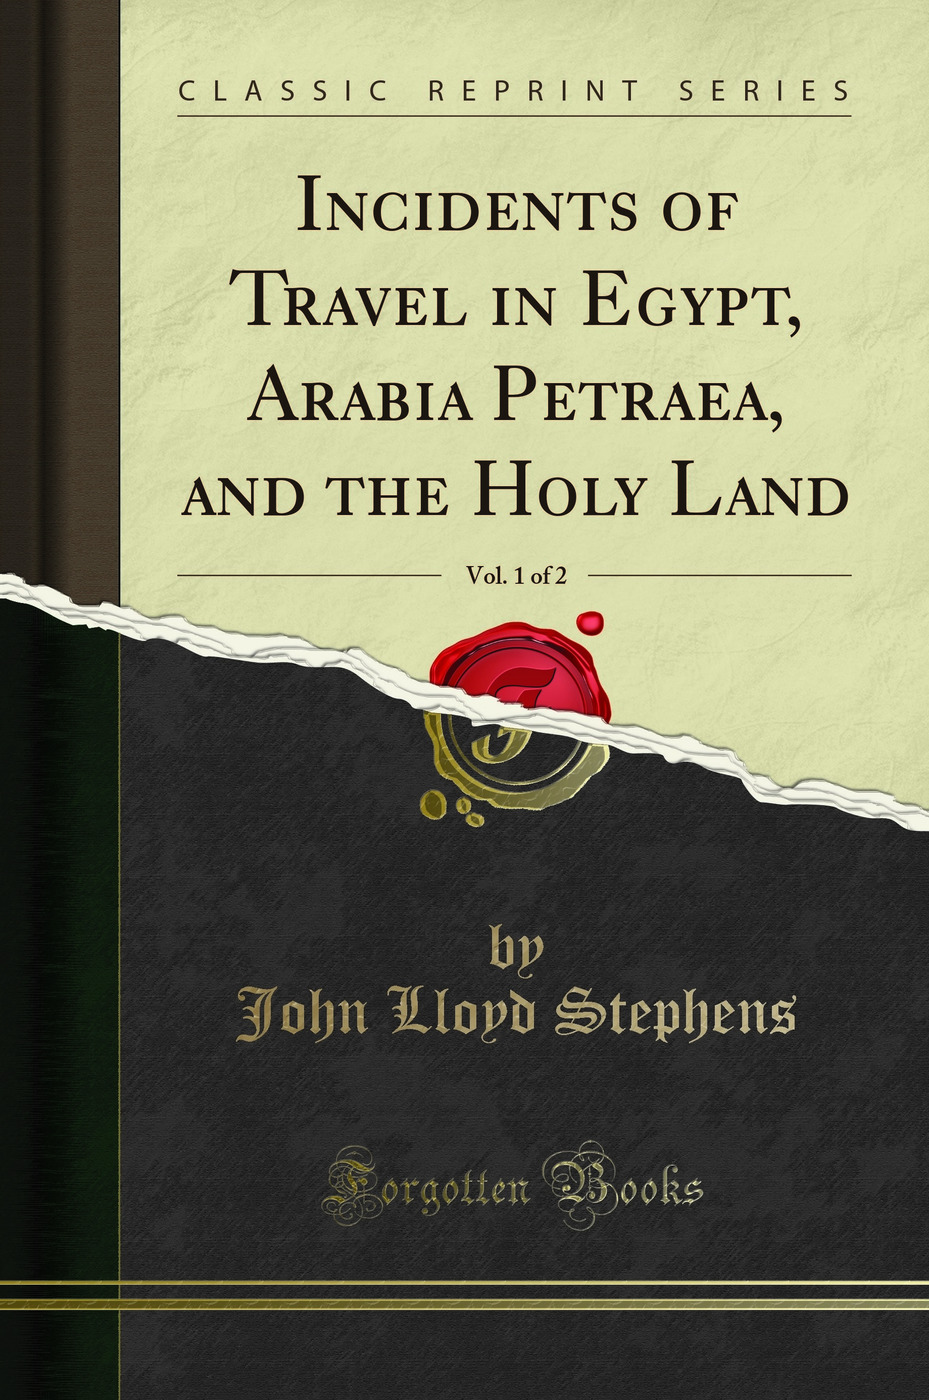 Incidents of Travel in Egypt, Arabia Petraea, and the Holy Land, Vol. 1 of 2 - John Lloyd Stephens